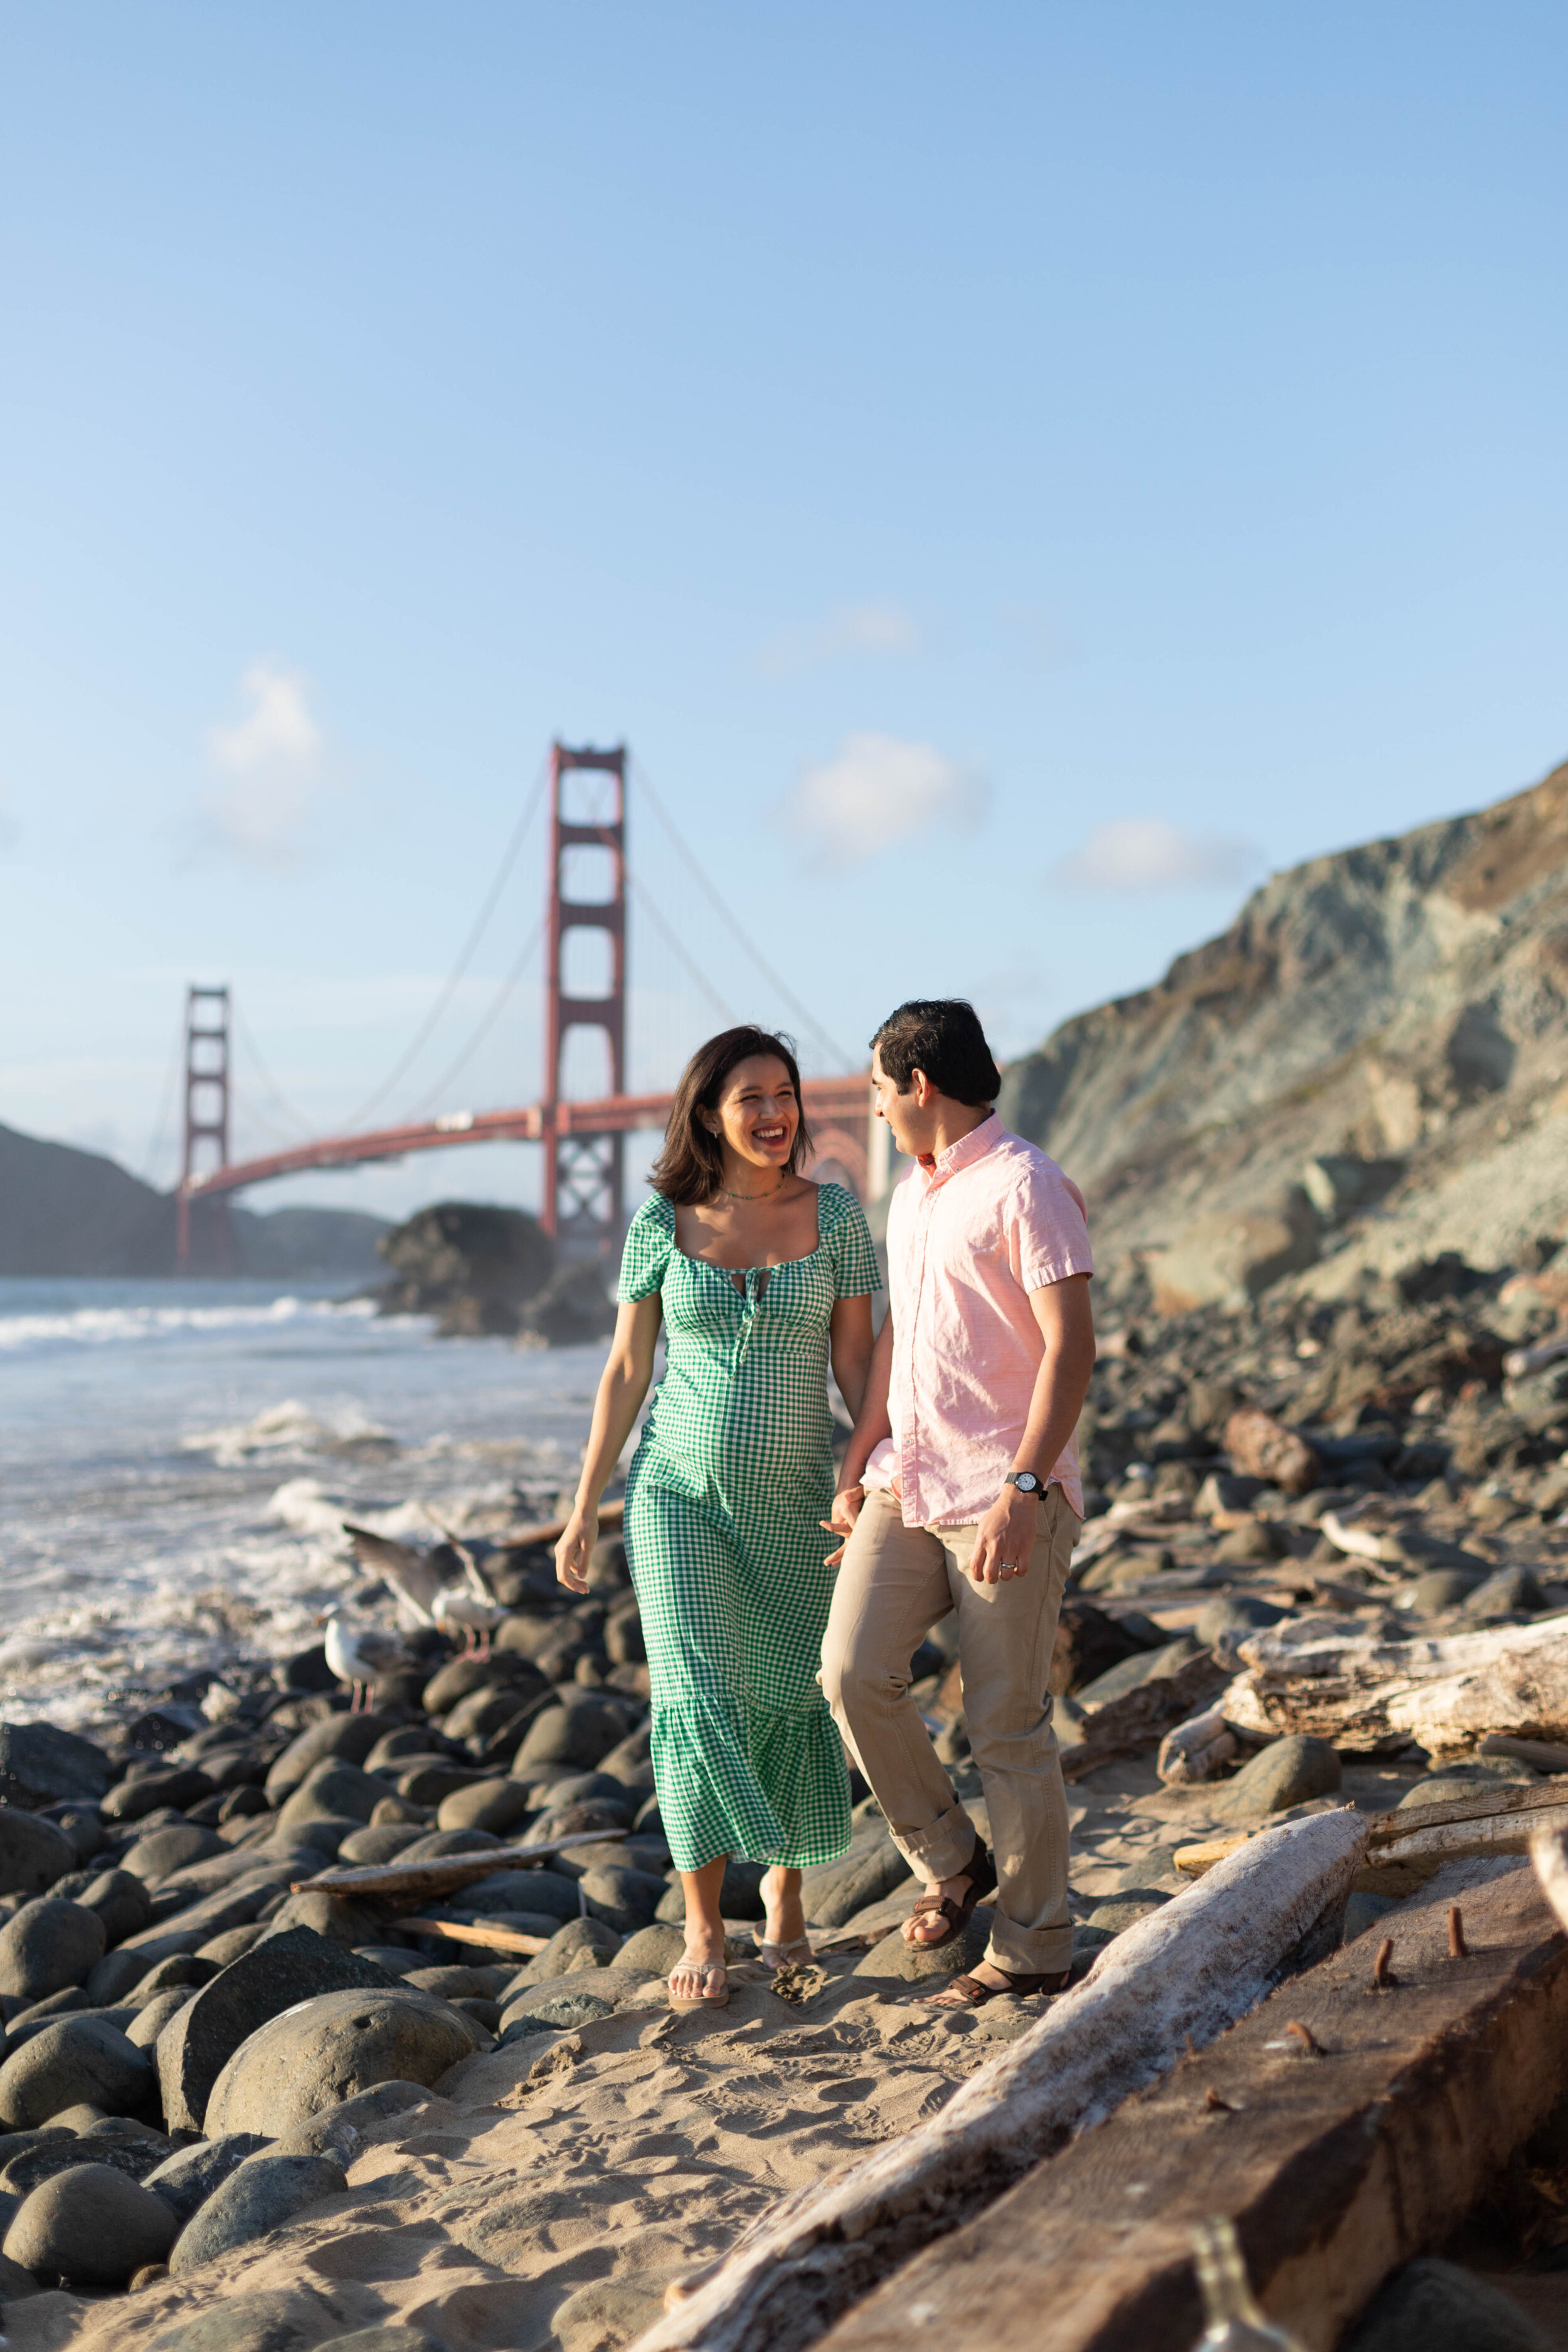  Pregnant couple walking on beach with Golden Gate Bridge in the background. Woman has short brown hair and is wearing a long, green, flowy dress. Man is wearing a pink shirt and khaki pants. They are looking at each other. 